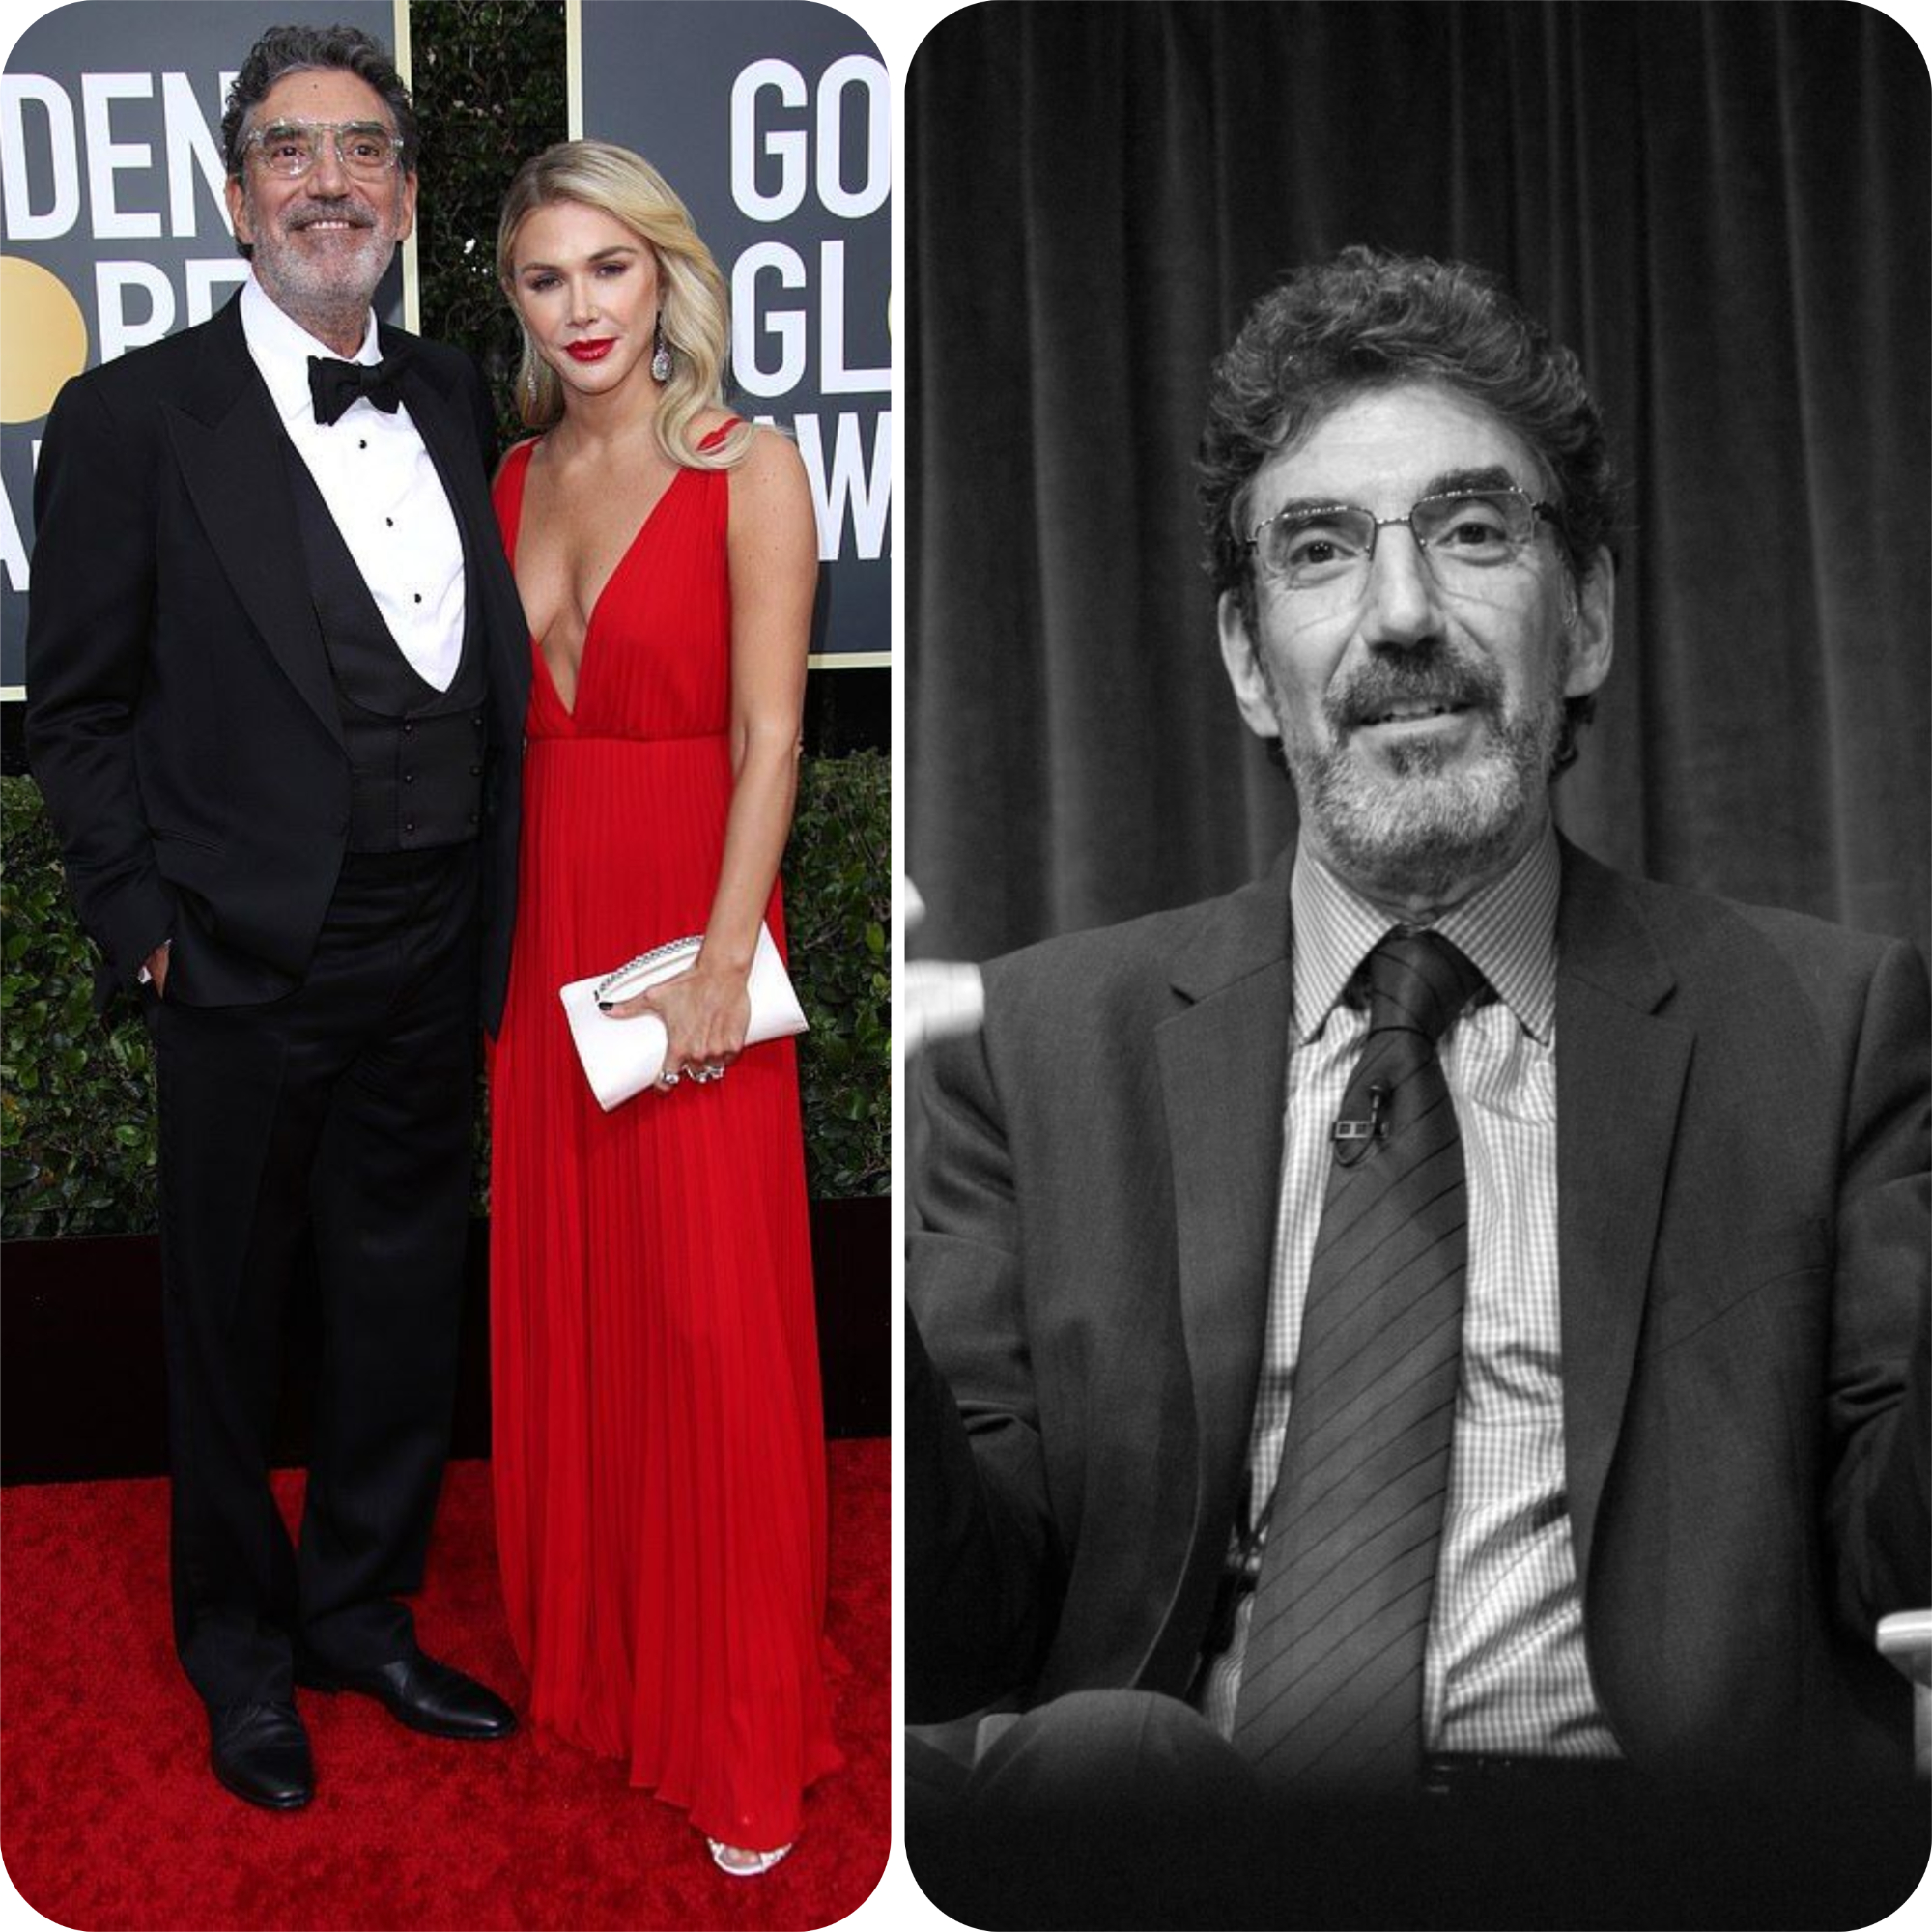 Chuck Lorre, the 